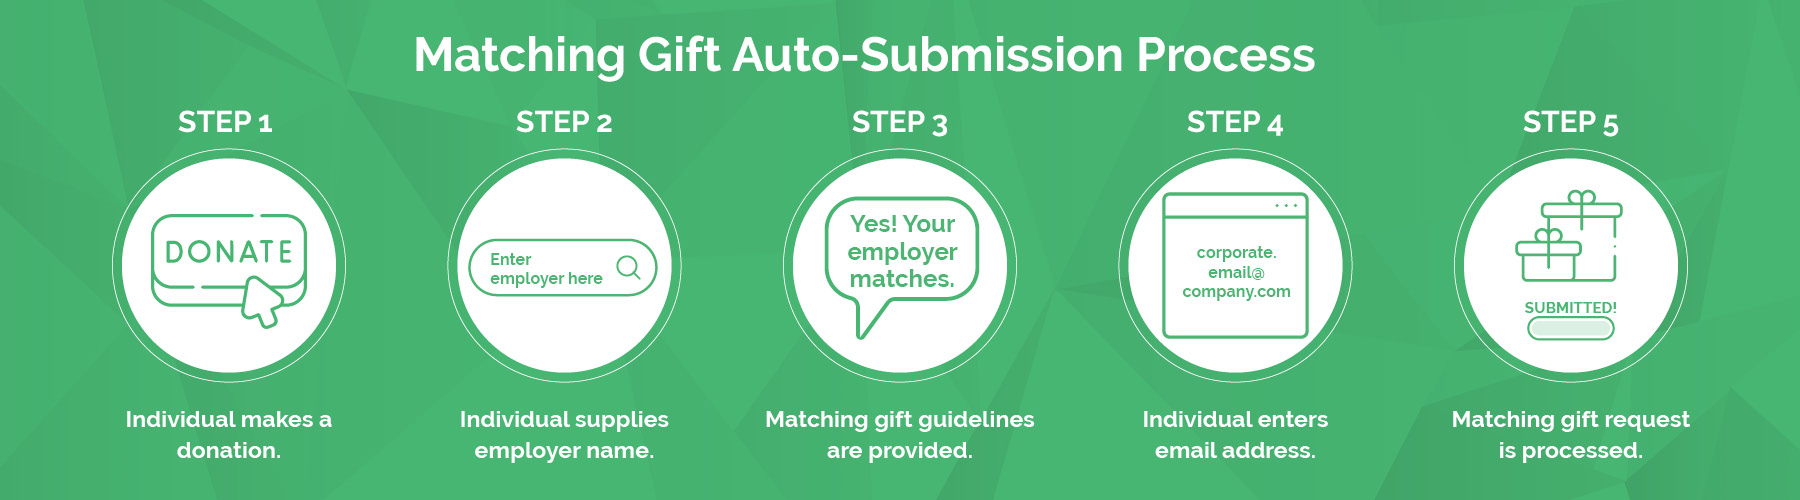 Matching gift disbursement - auto-submission process